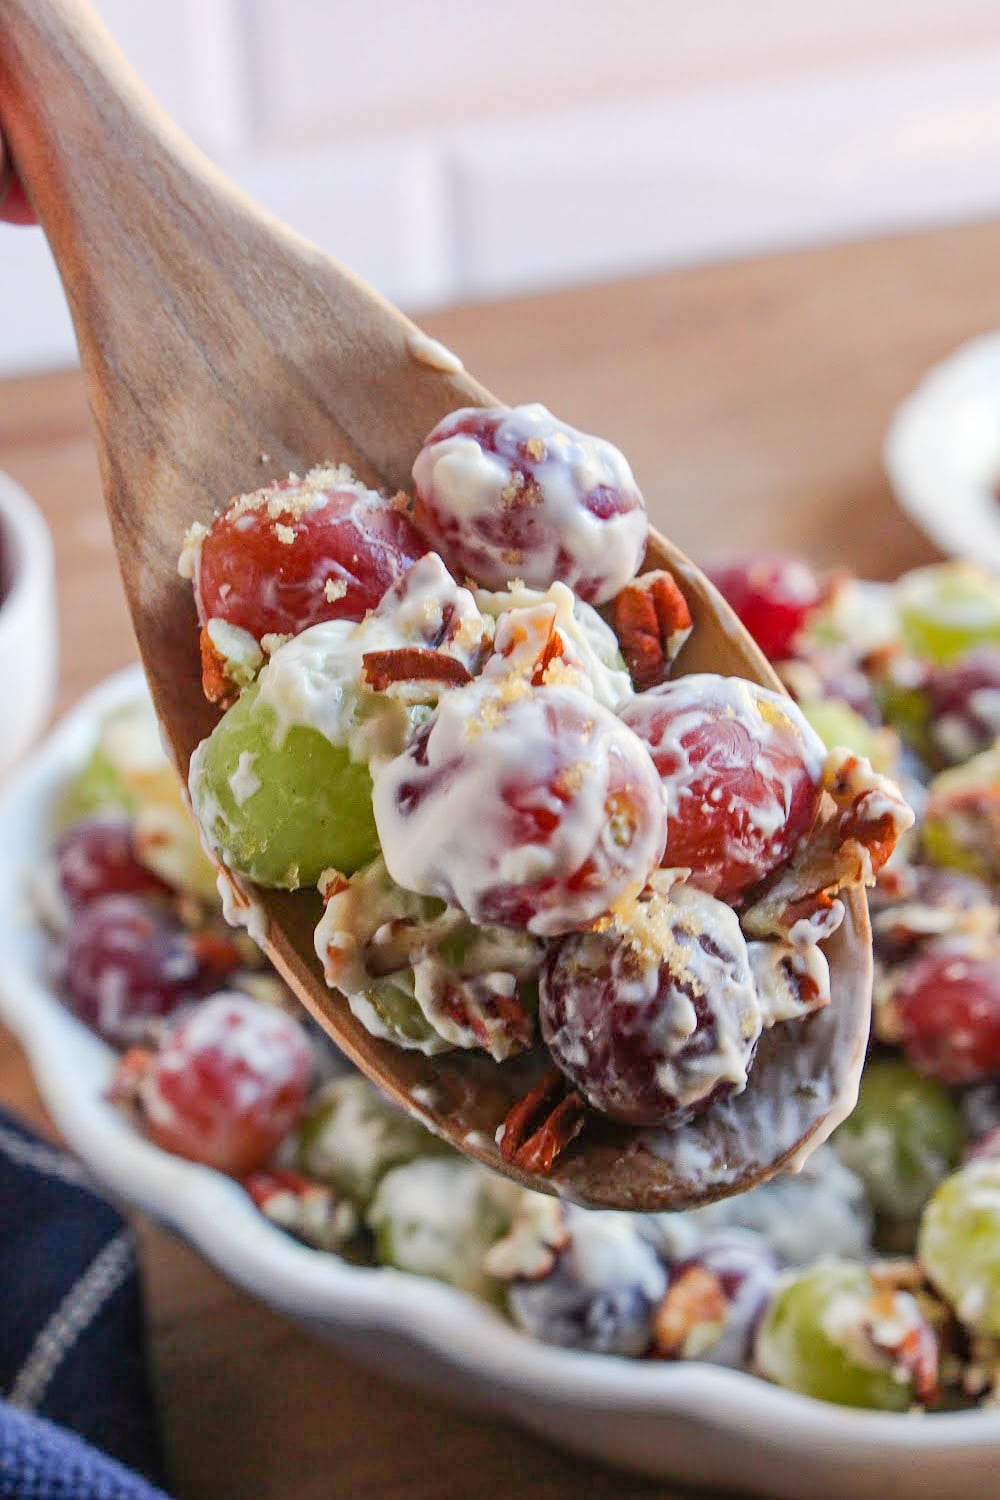 A single wooden spoon holds a scoop of grape salad.